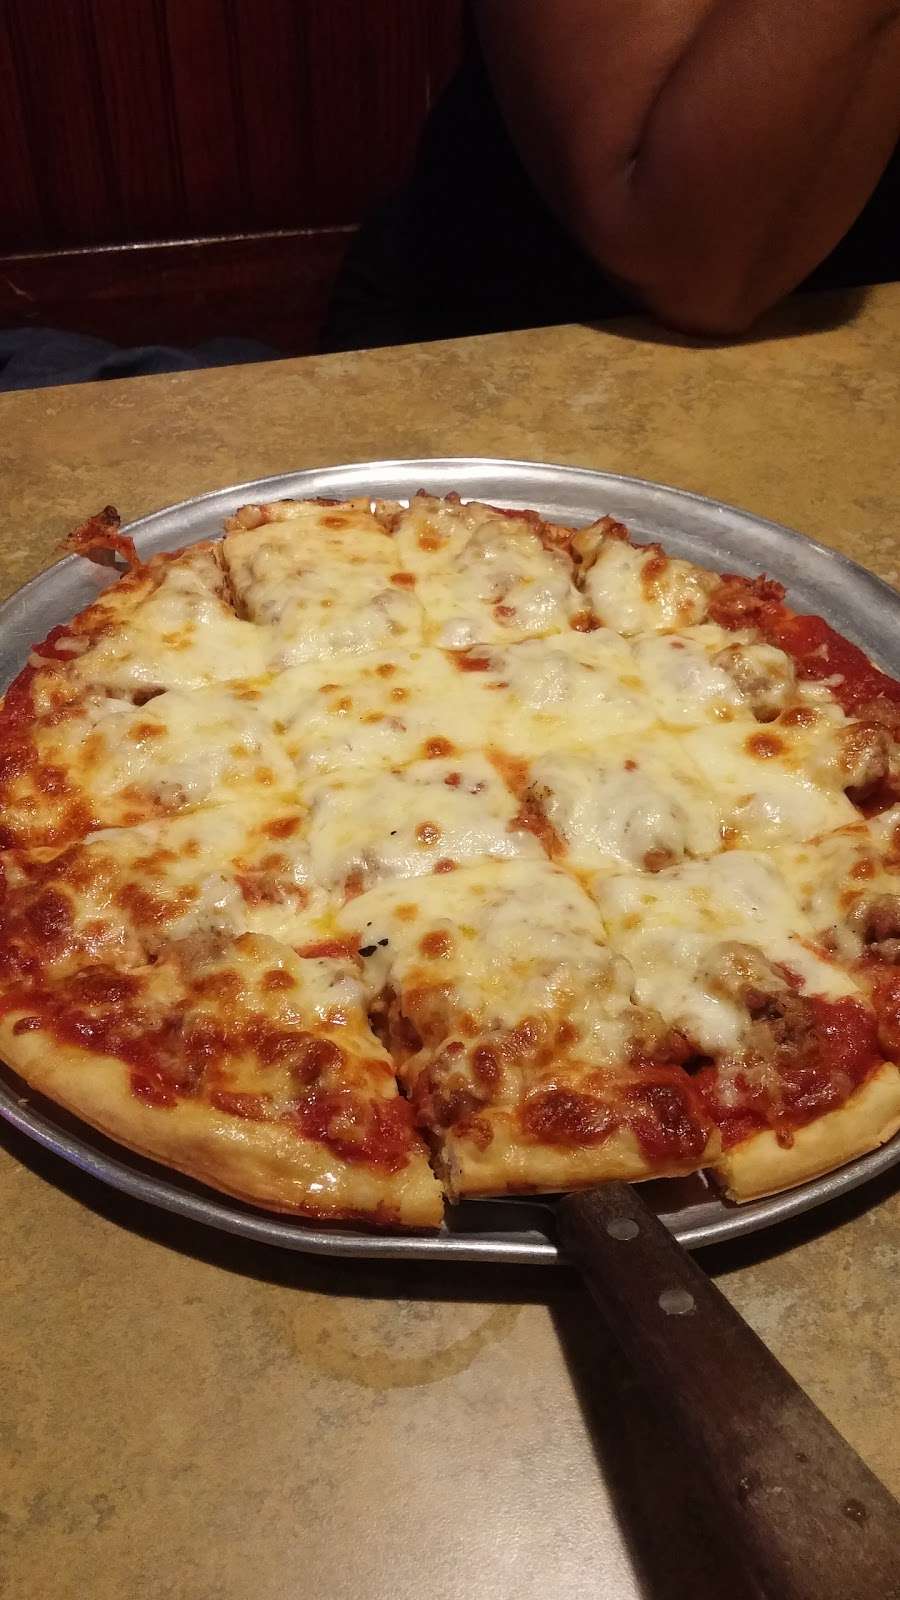 Beggars Pizza | 22149 Governors Hwy, Richton Park, IL 60471 | Phone: (708) 679-9990